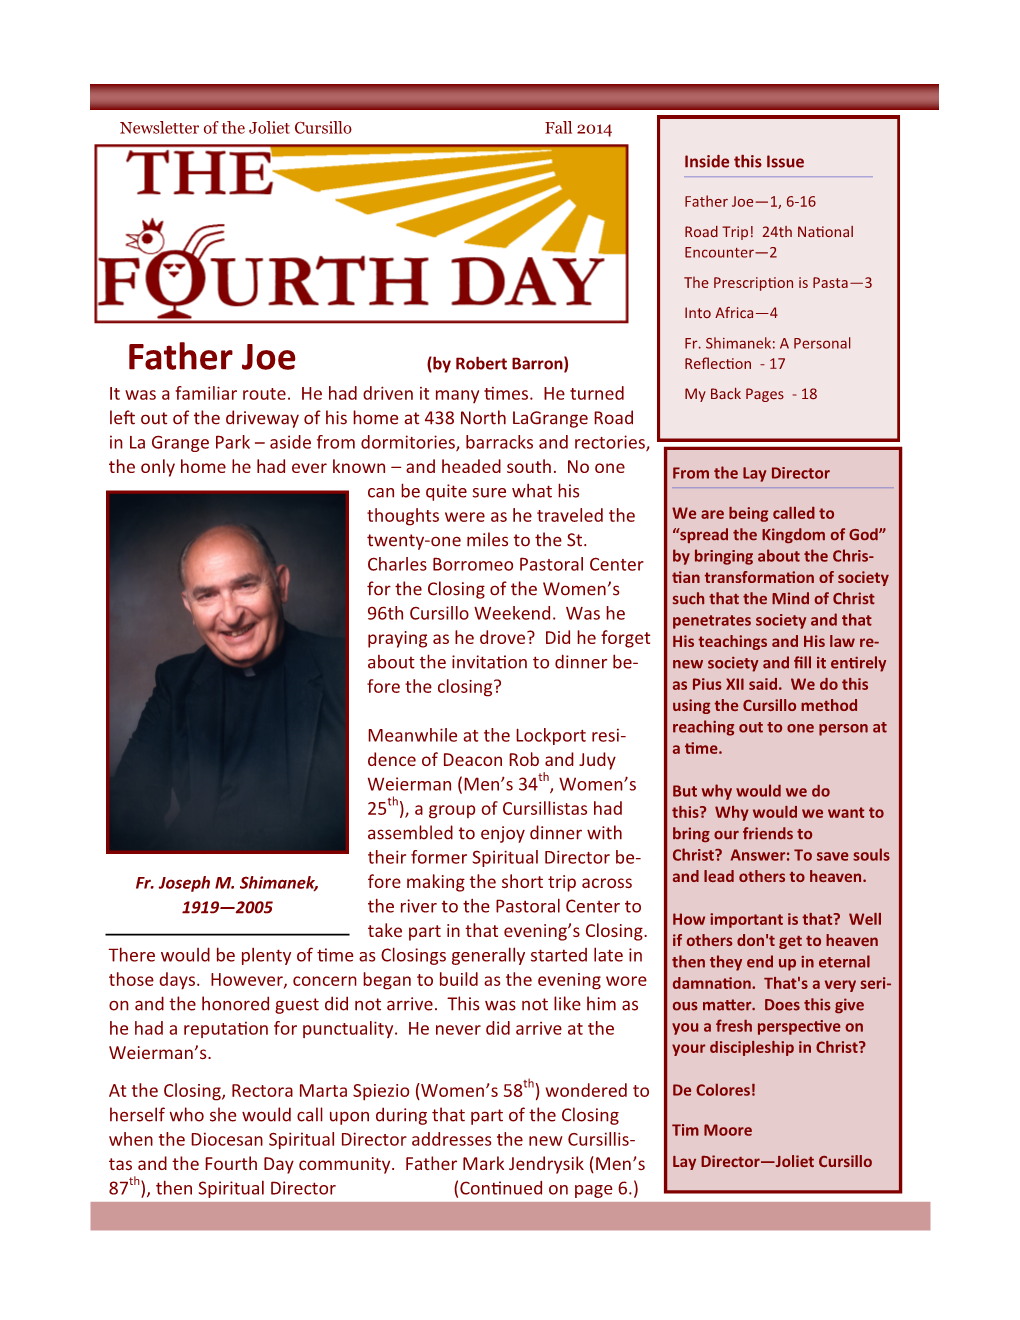 Father Joe (By Robert Barron) Reflection - 17 It Was a Familiar Route